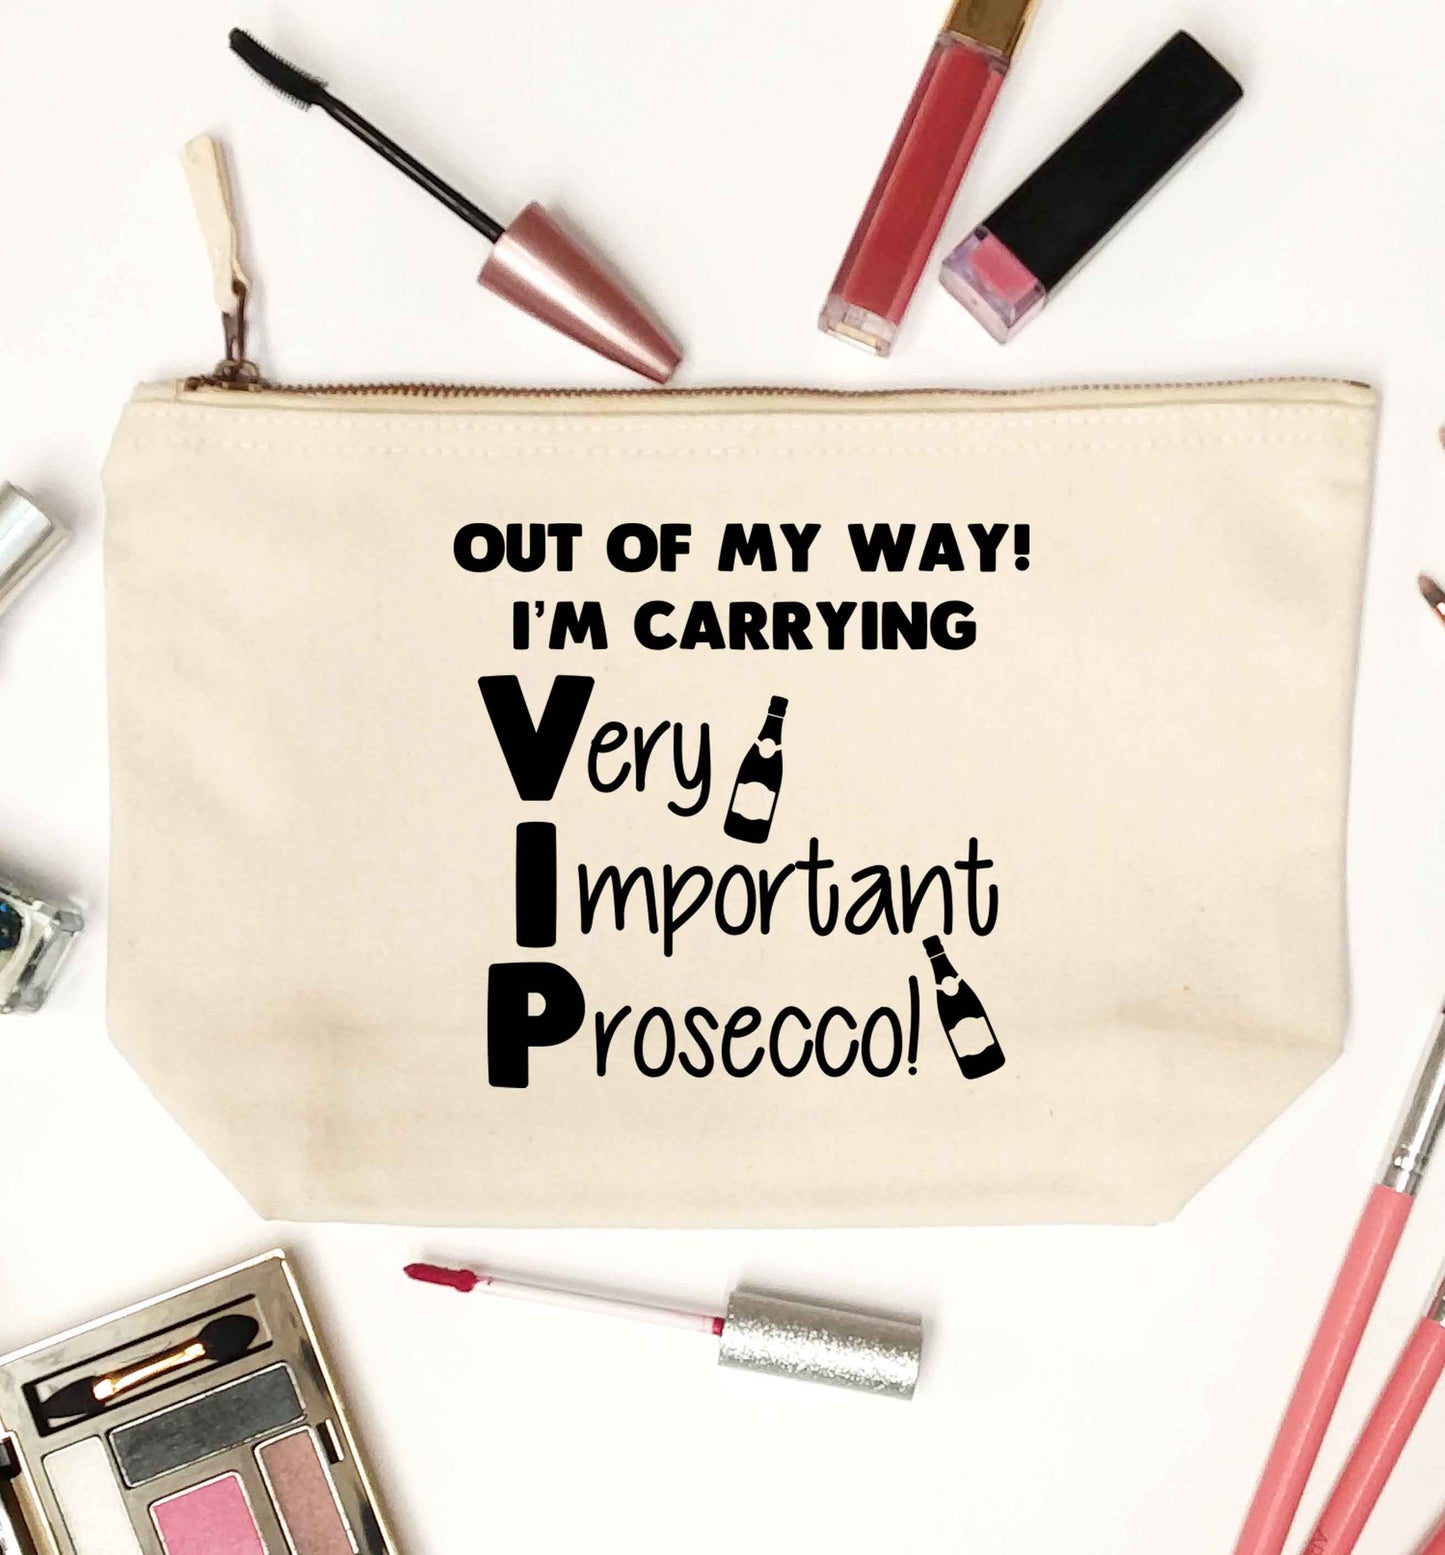 Out of my way I'm carrying very important prosecco! natural makeup bag